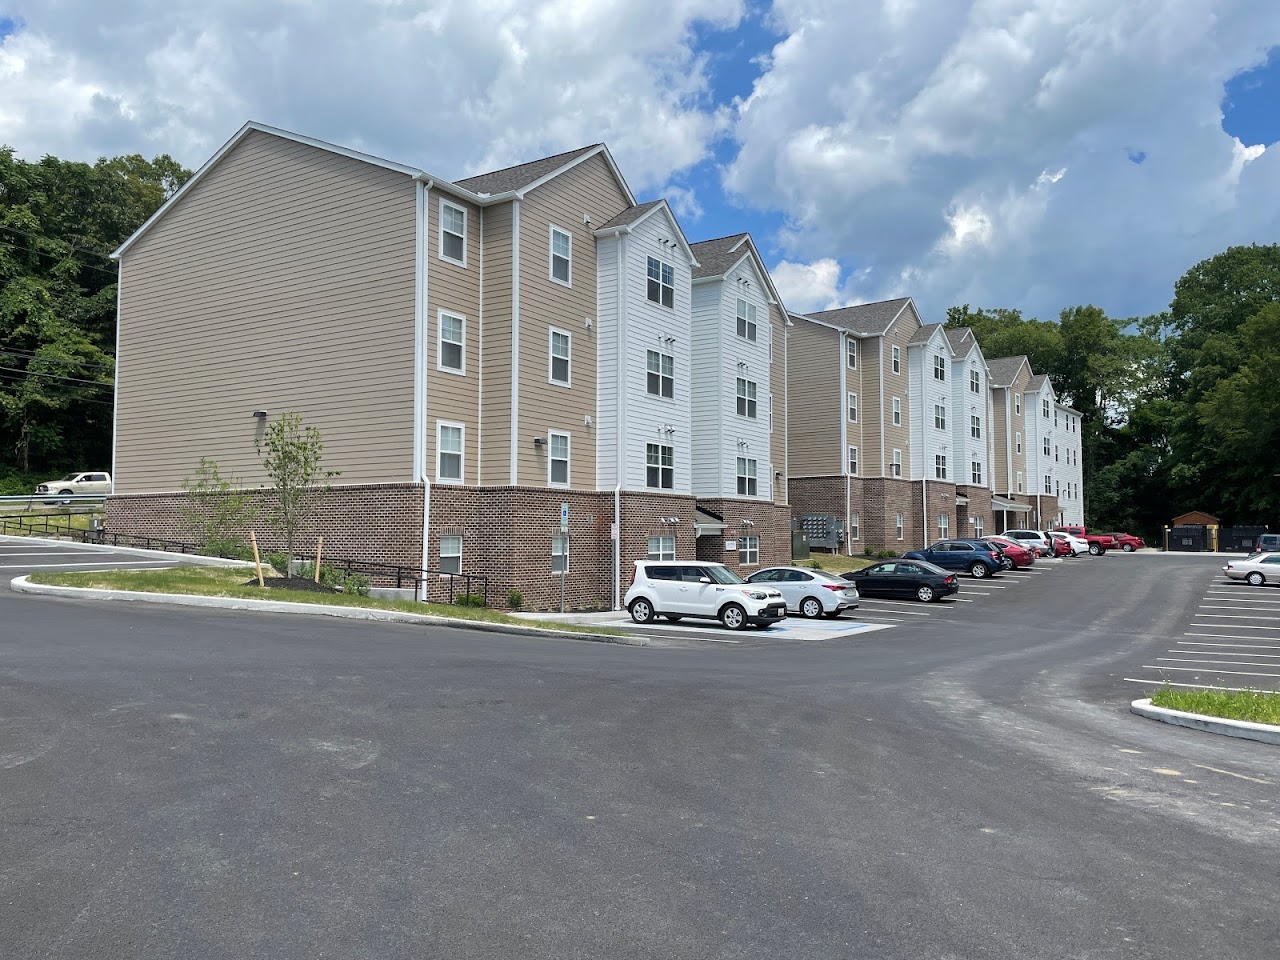 Photo of MAGNOLIA GREENE. Affordable housing located at 13000 WINCHESTER PIKE LAVALE, MD 21502